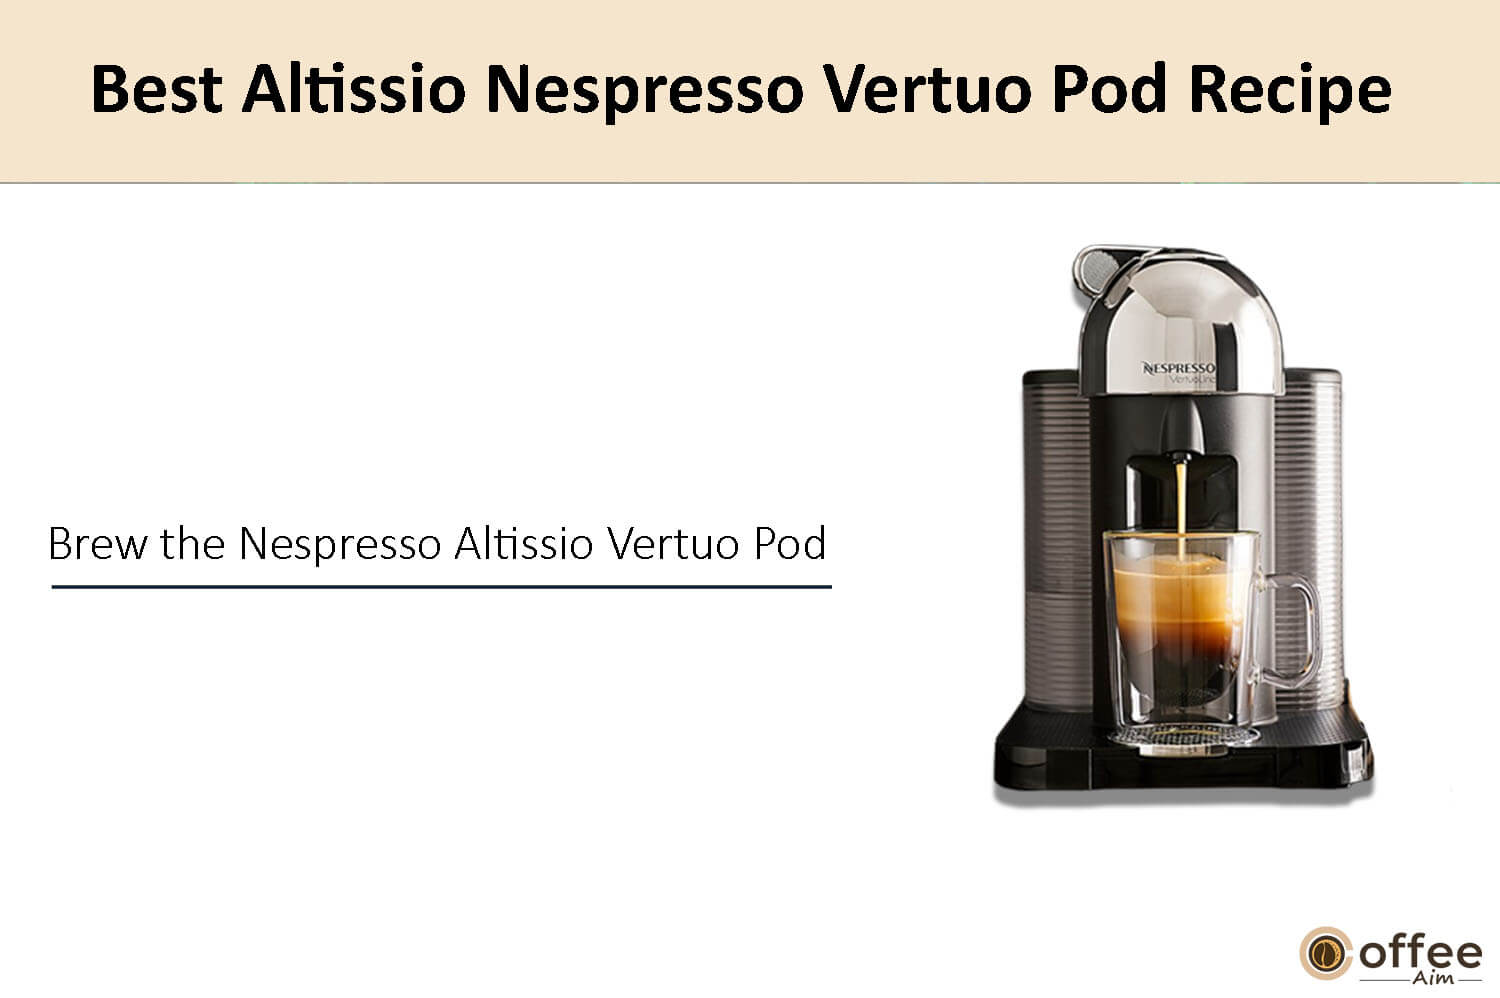 In this image, I clarify the preparation instructions for crafting the finest Altissio Nespresso Vertuo coffee pod.